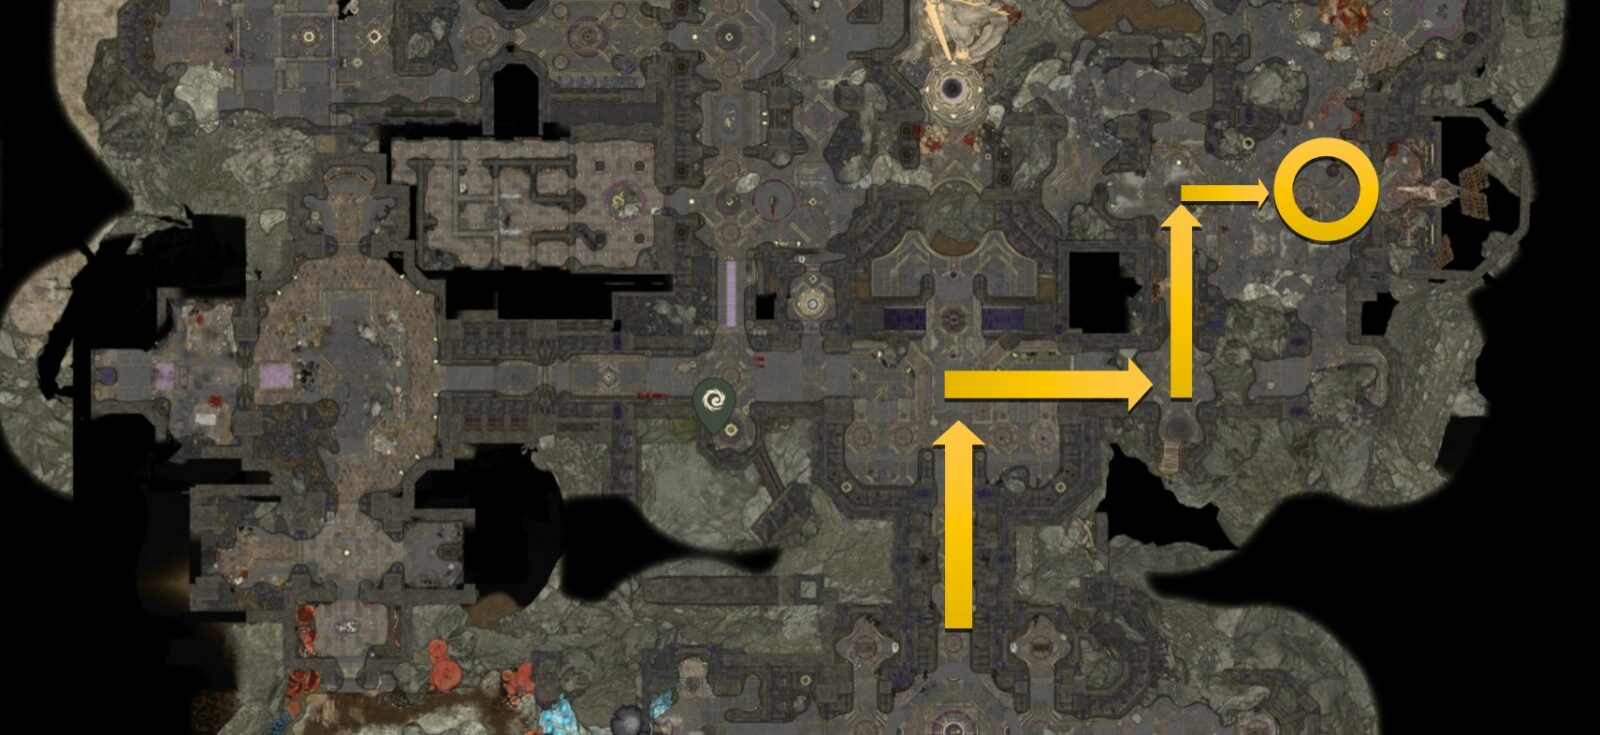 Puzzle solution to enter Gauntlet of Shar in BG3